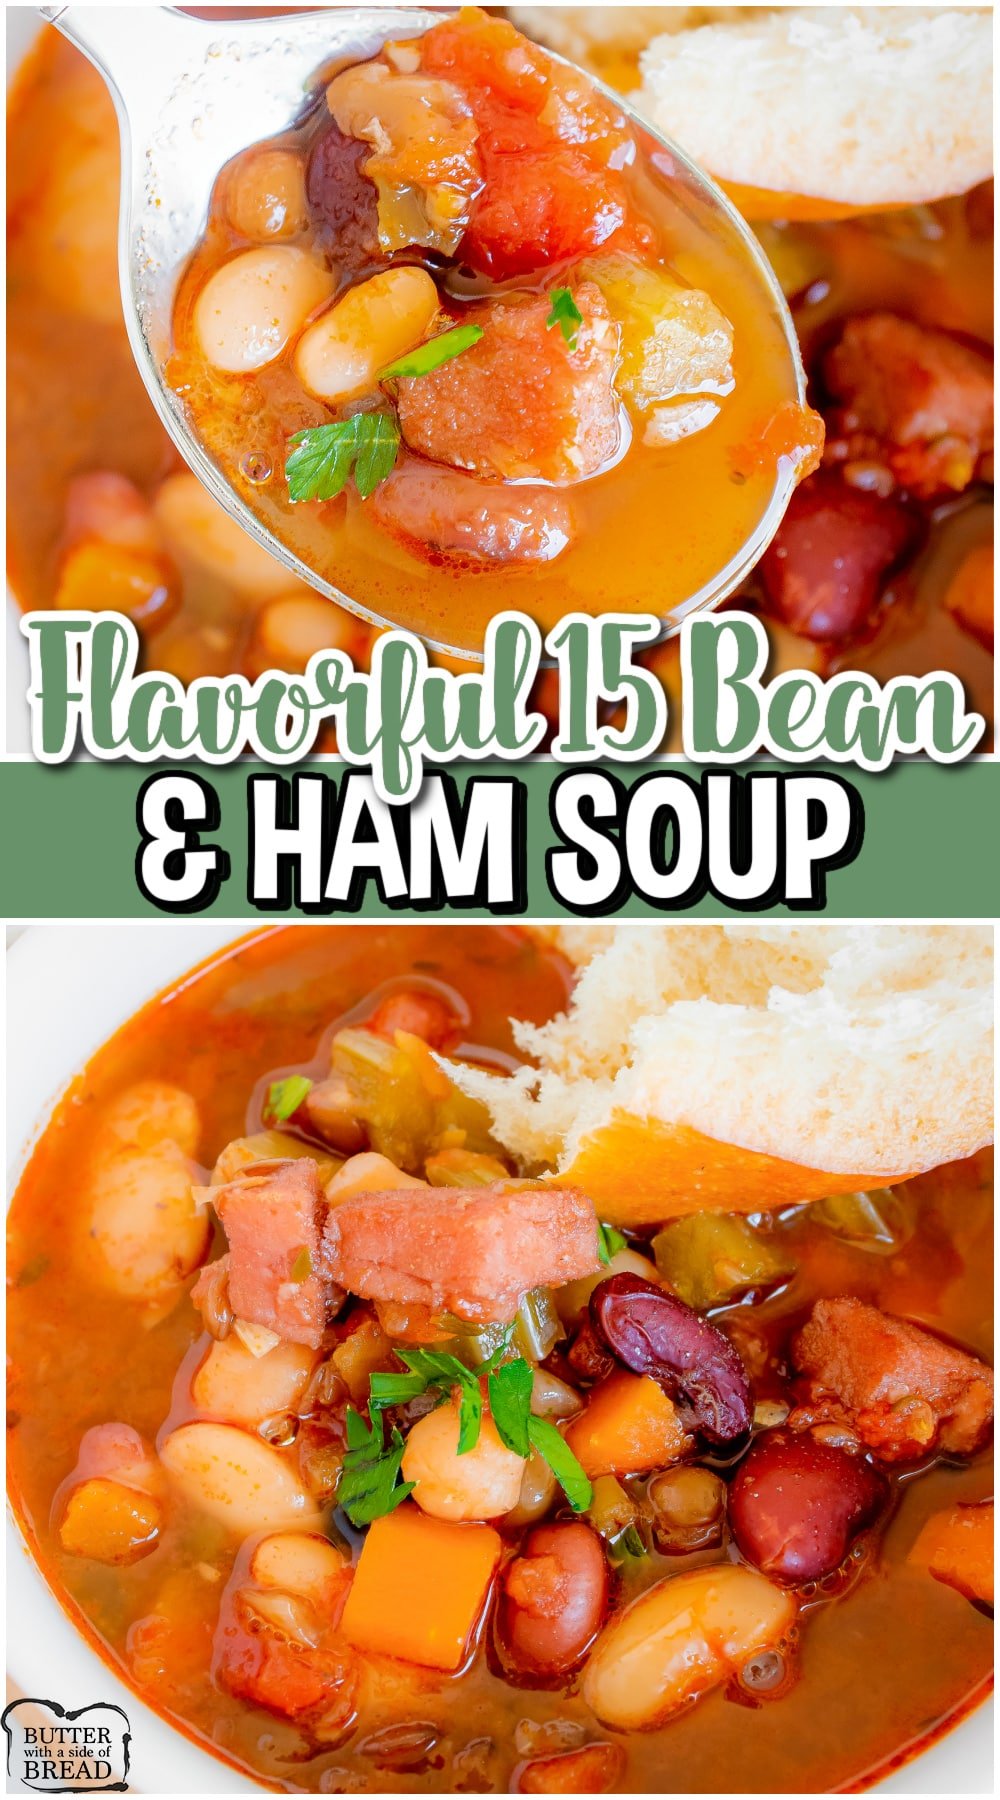 Hurst 15 bean soup is a sensational dish with amazing flavors & packed with fiber and protein. This bean and ham soup recipe is perfect for leftover ham & makes a lovely meal on a cold winter's day.